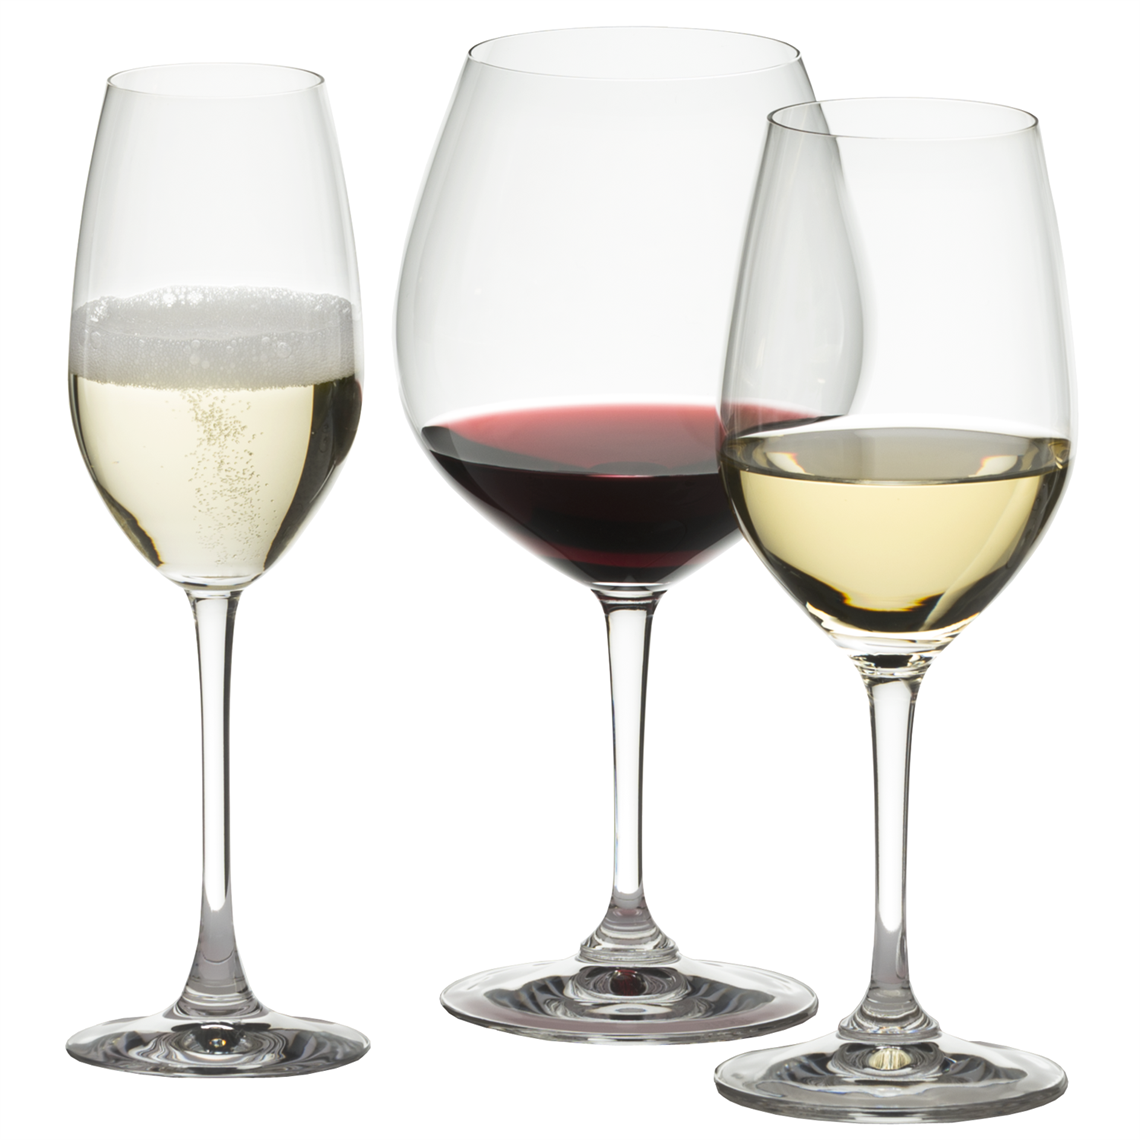 View more riedel veloce from our Restaurant & Trade Glasses range